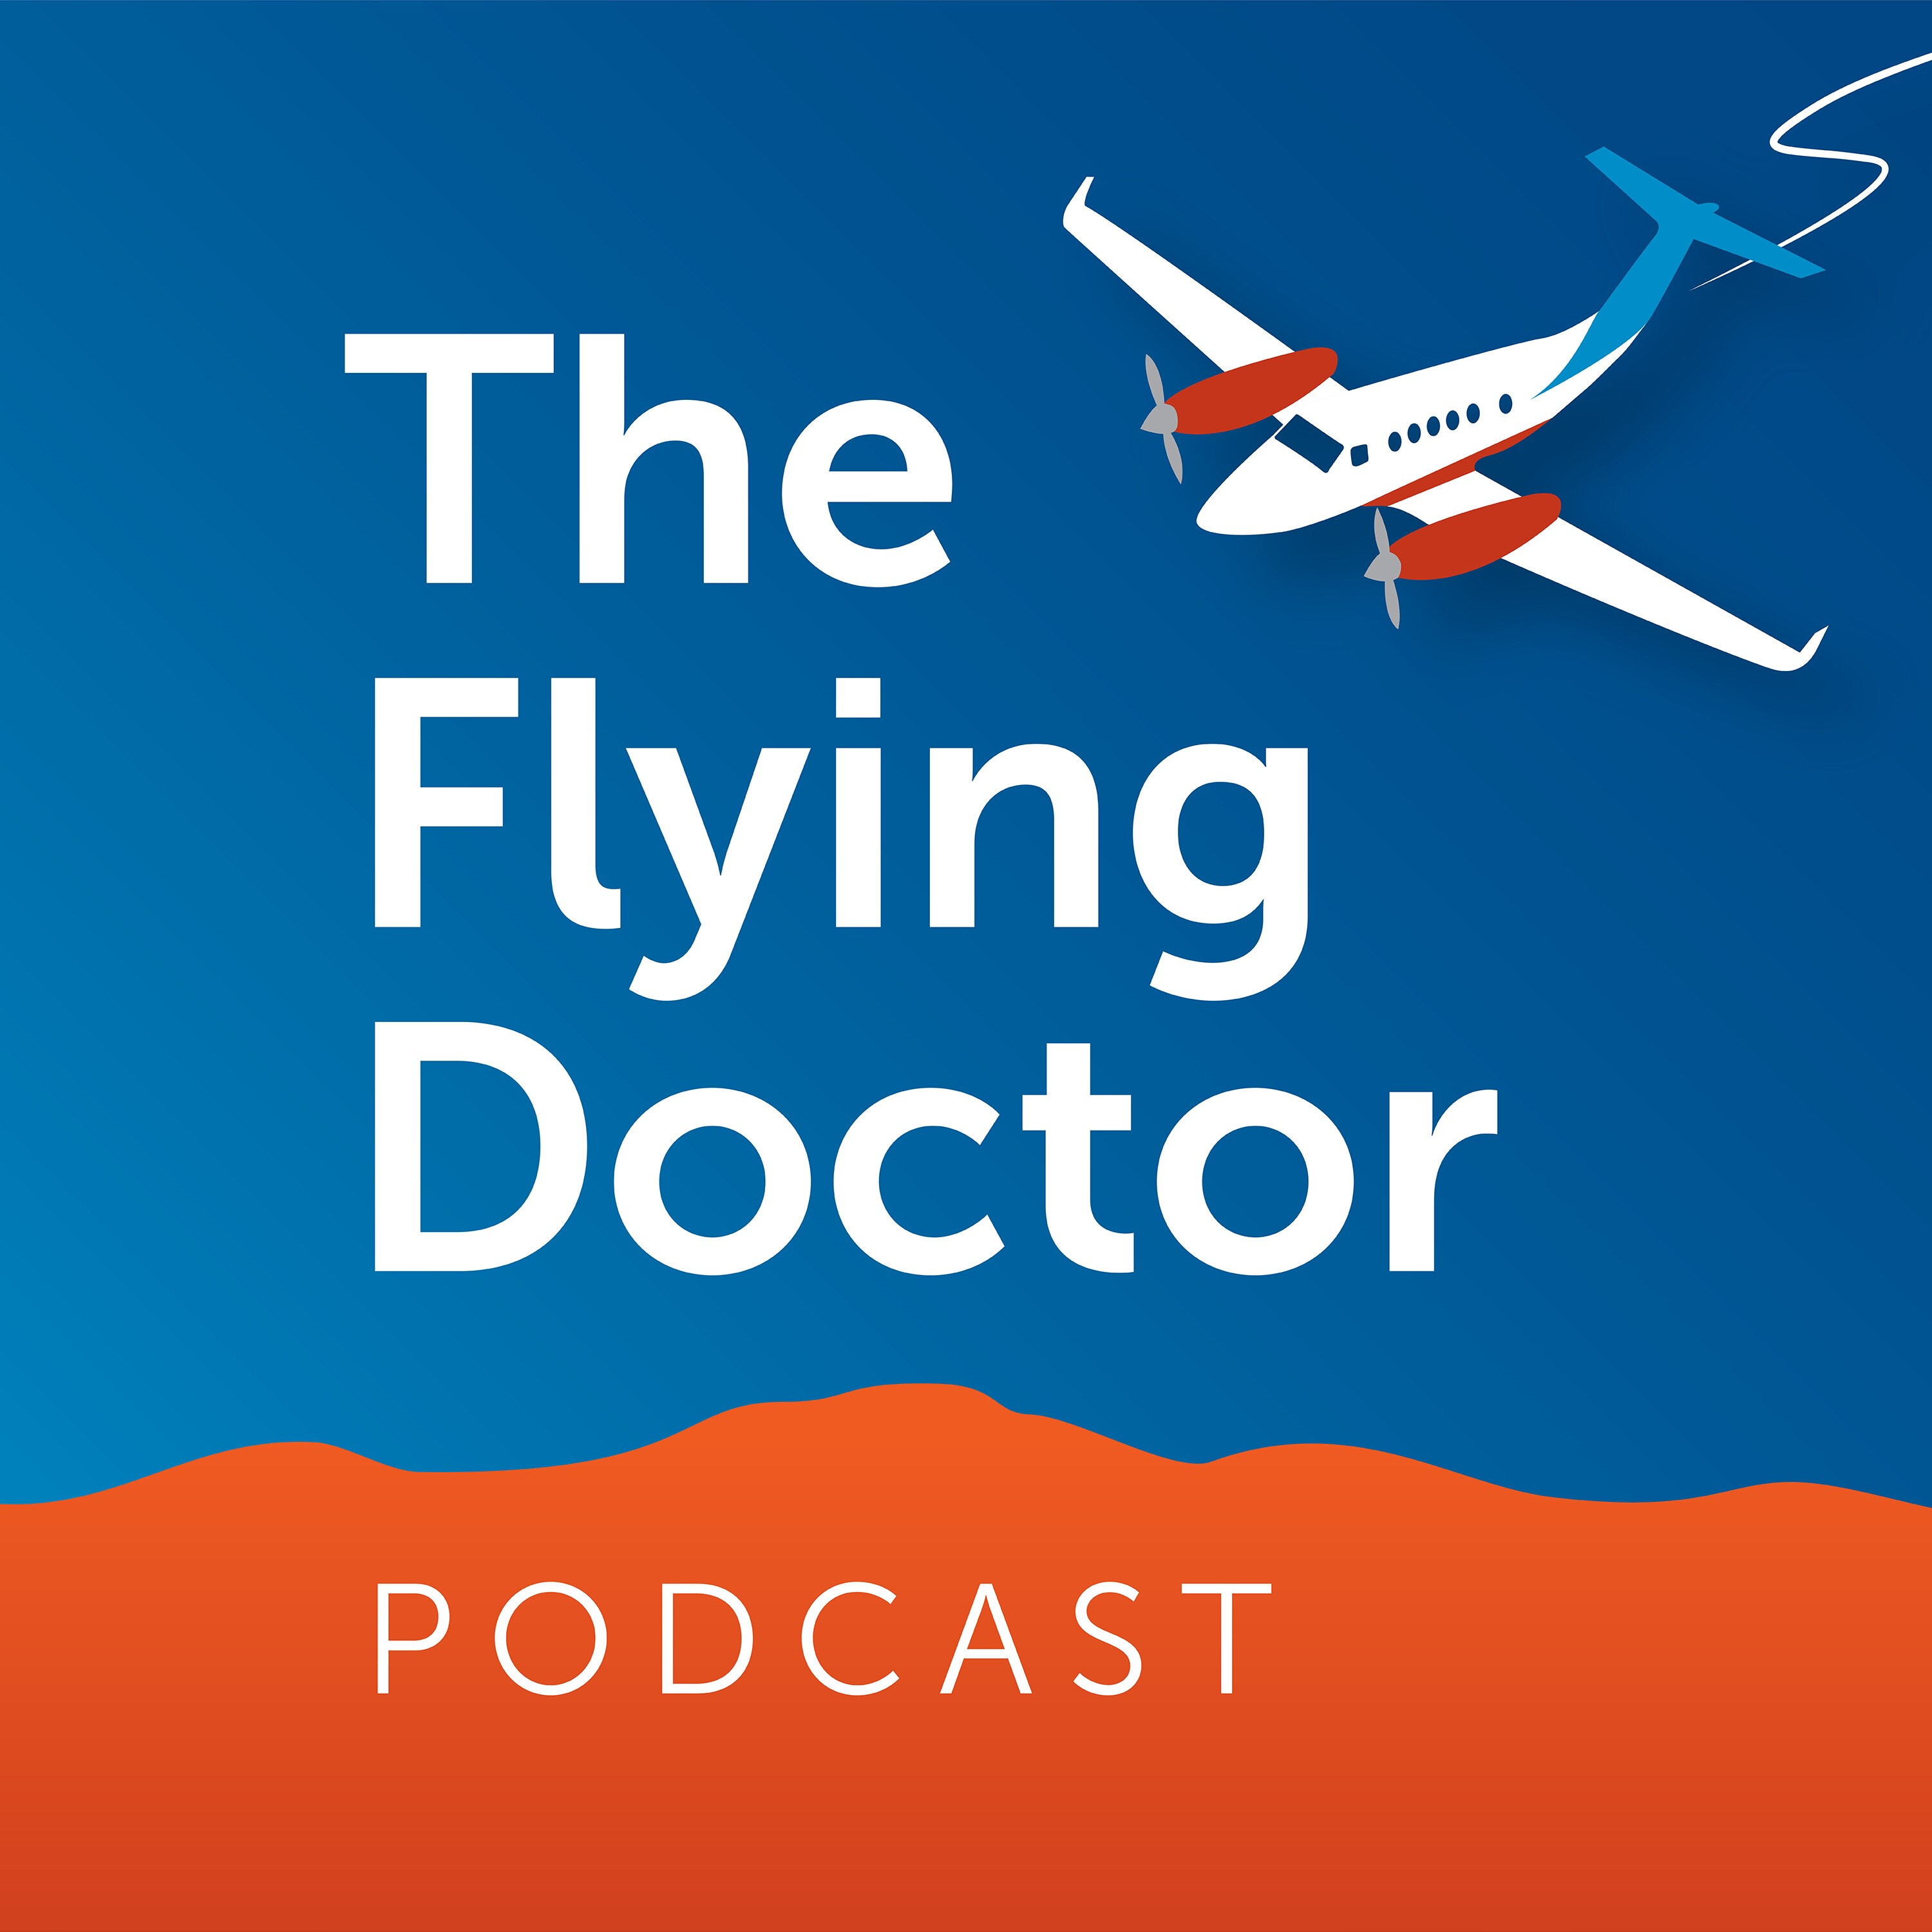 #77 Dr Katrina Starmer tells how she was inspired to become a Flying Doctor